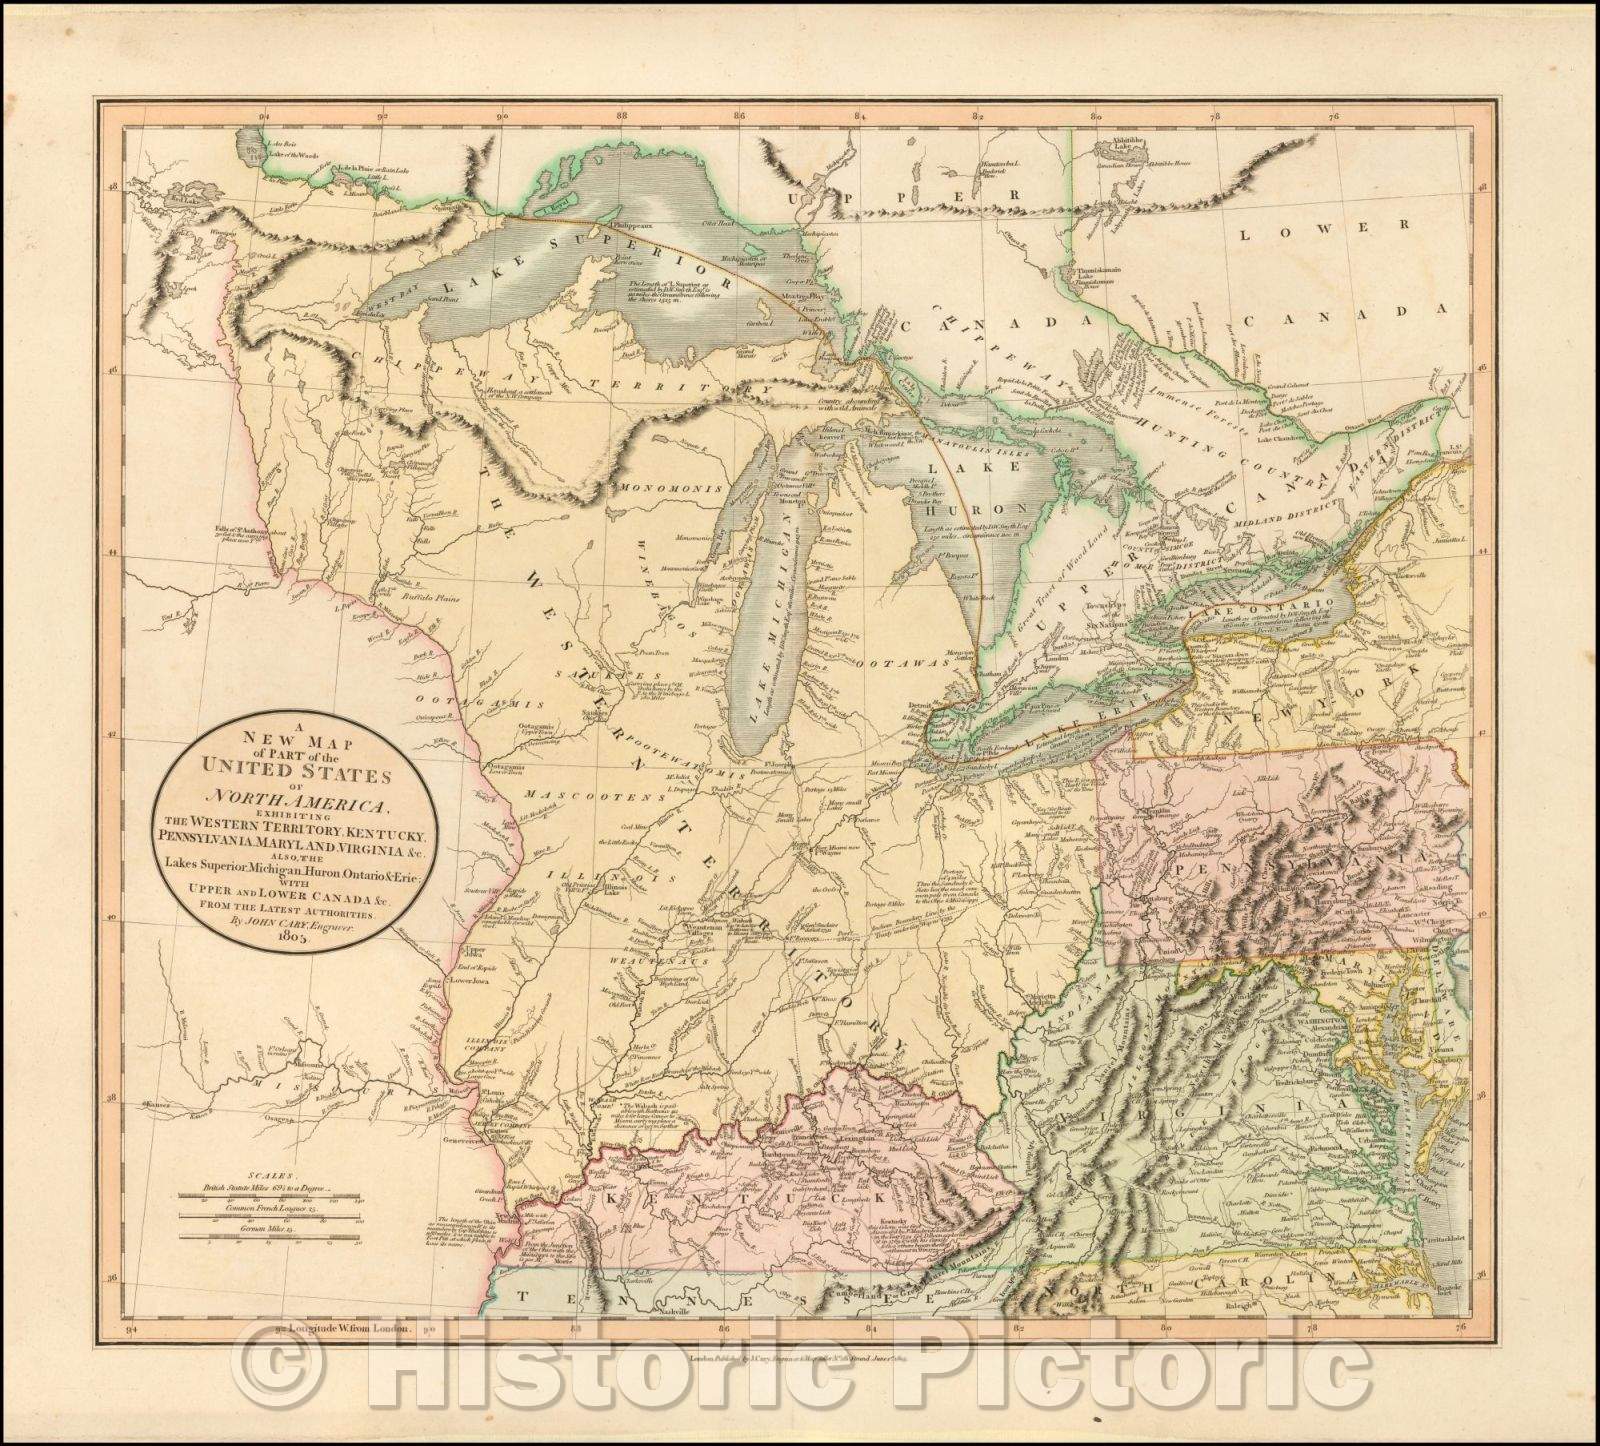 Historic Map - A New Map of Part of the United States of North America, Exhibiting The Western Territory, Kentucky, Pennsylvania, Maryland, Virginia, 1811 v2